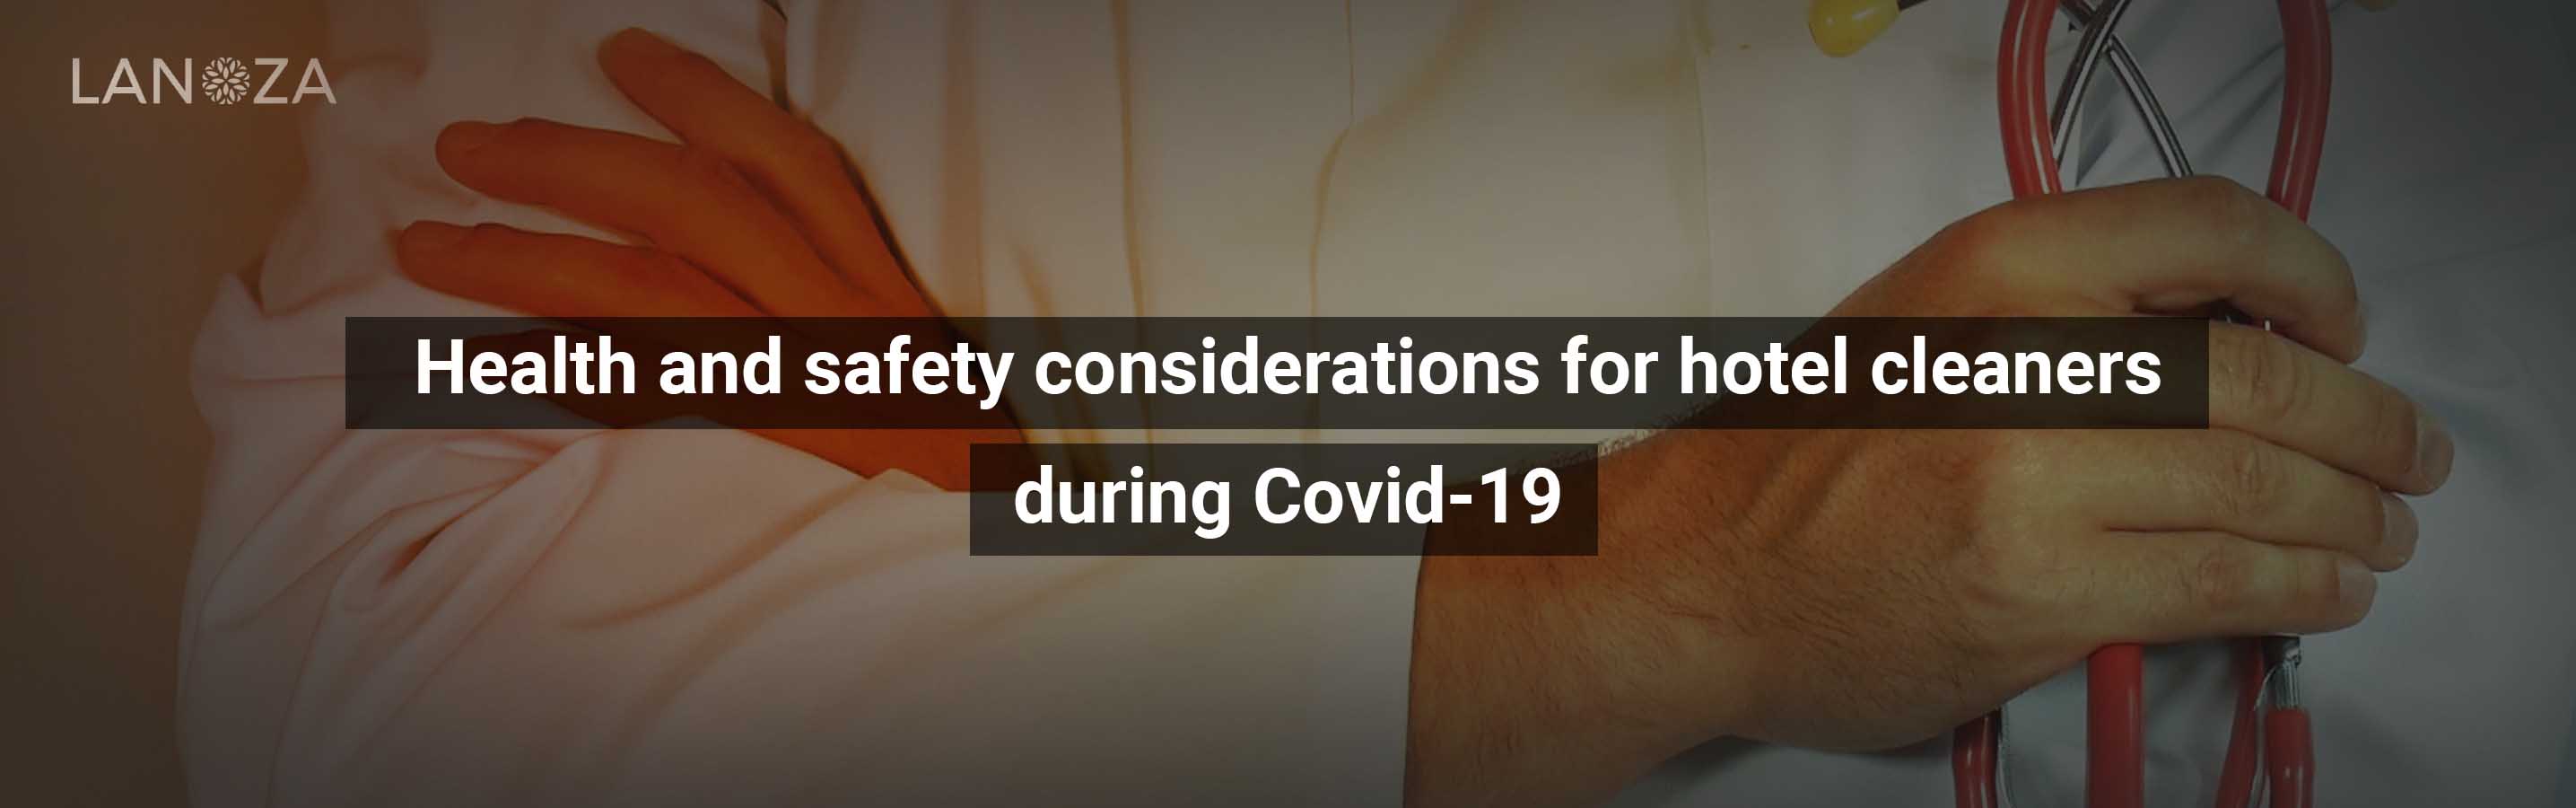 health-and-safety-considerations-for-hotel-cleaners-during-covid-19